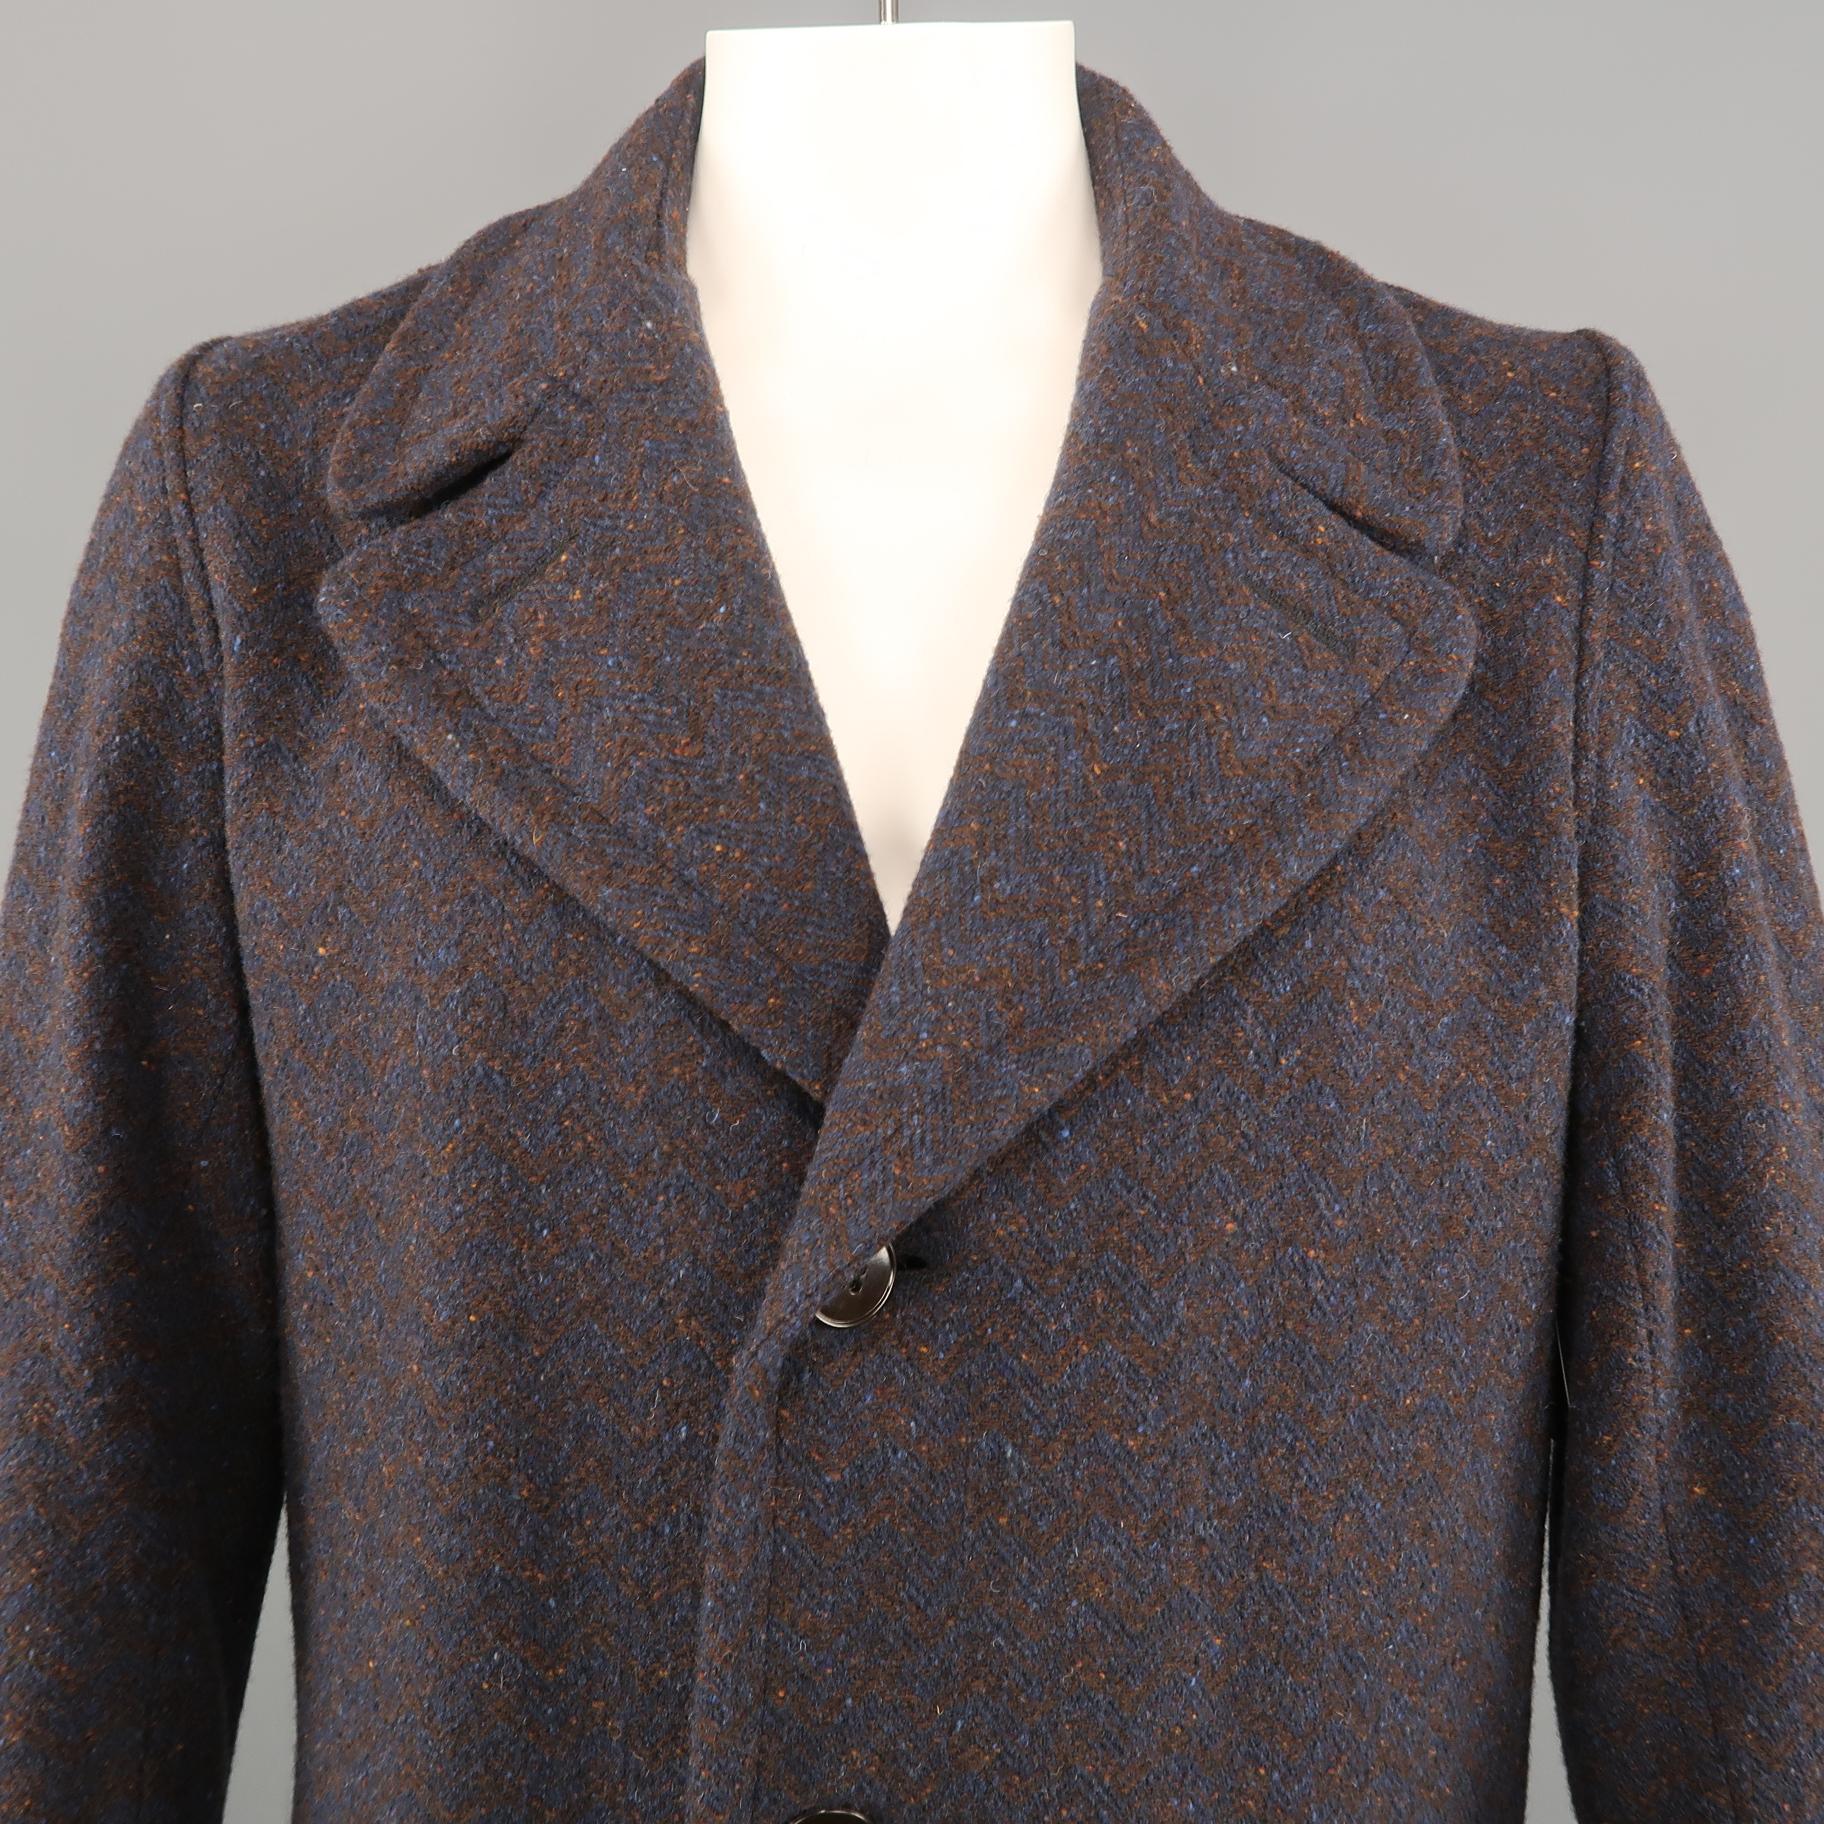 FRANK LEDER coat comes in a navy & brown heather wool with a full olive liner featuring a oversized style, notch lapel, flap pockets, and a buttoned closure. Comes with tags.

Excellent Pre-Owned Condition.
Marked: M

Measurements:

Shoulder: 17.5